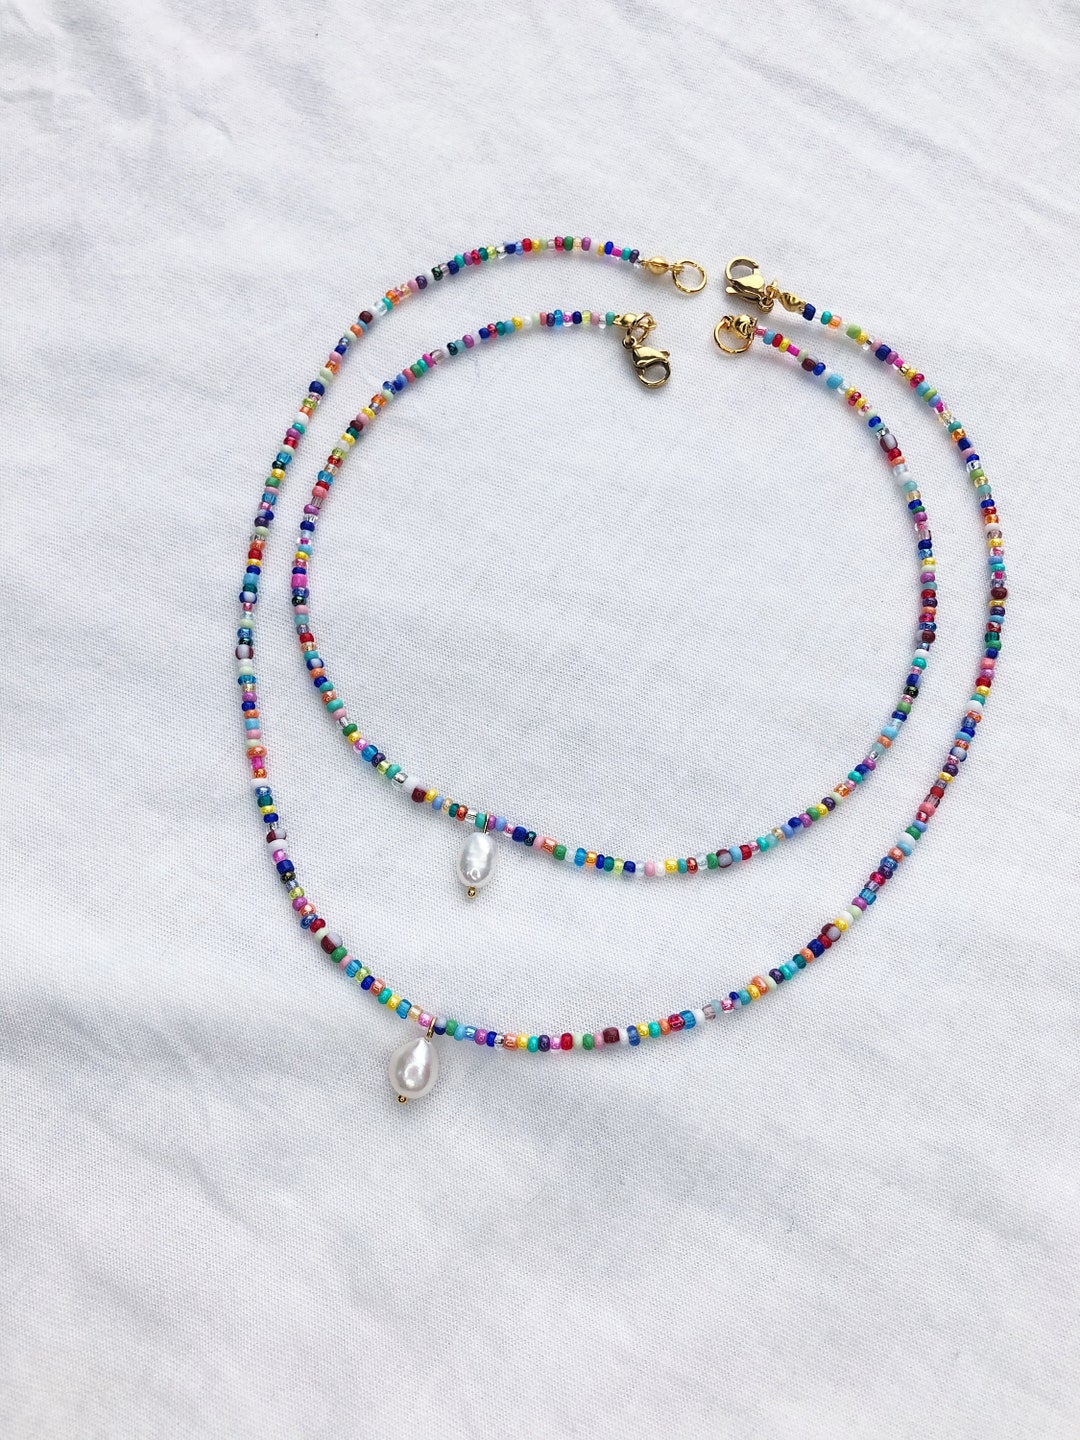 Mother Daughter Necklace , Matching Necklace, Seed Bead Necklace ...